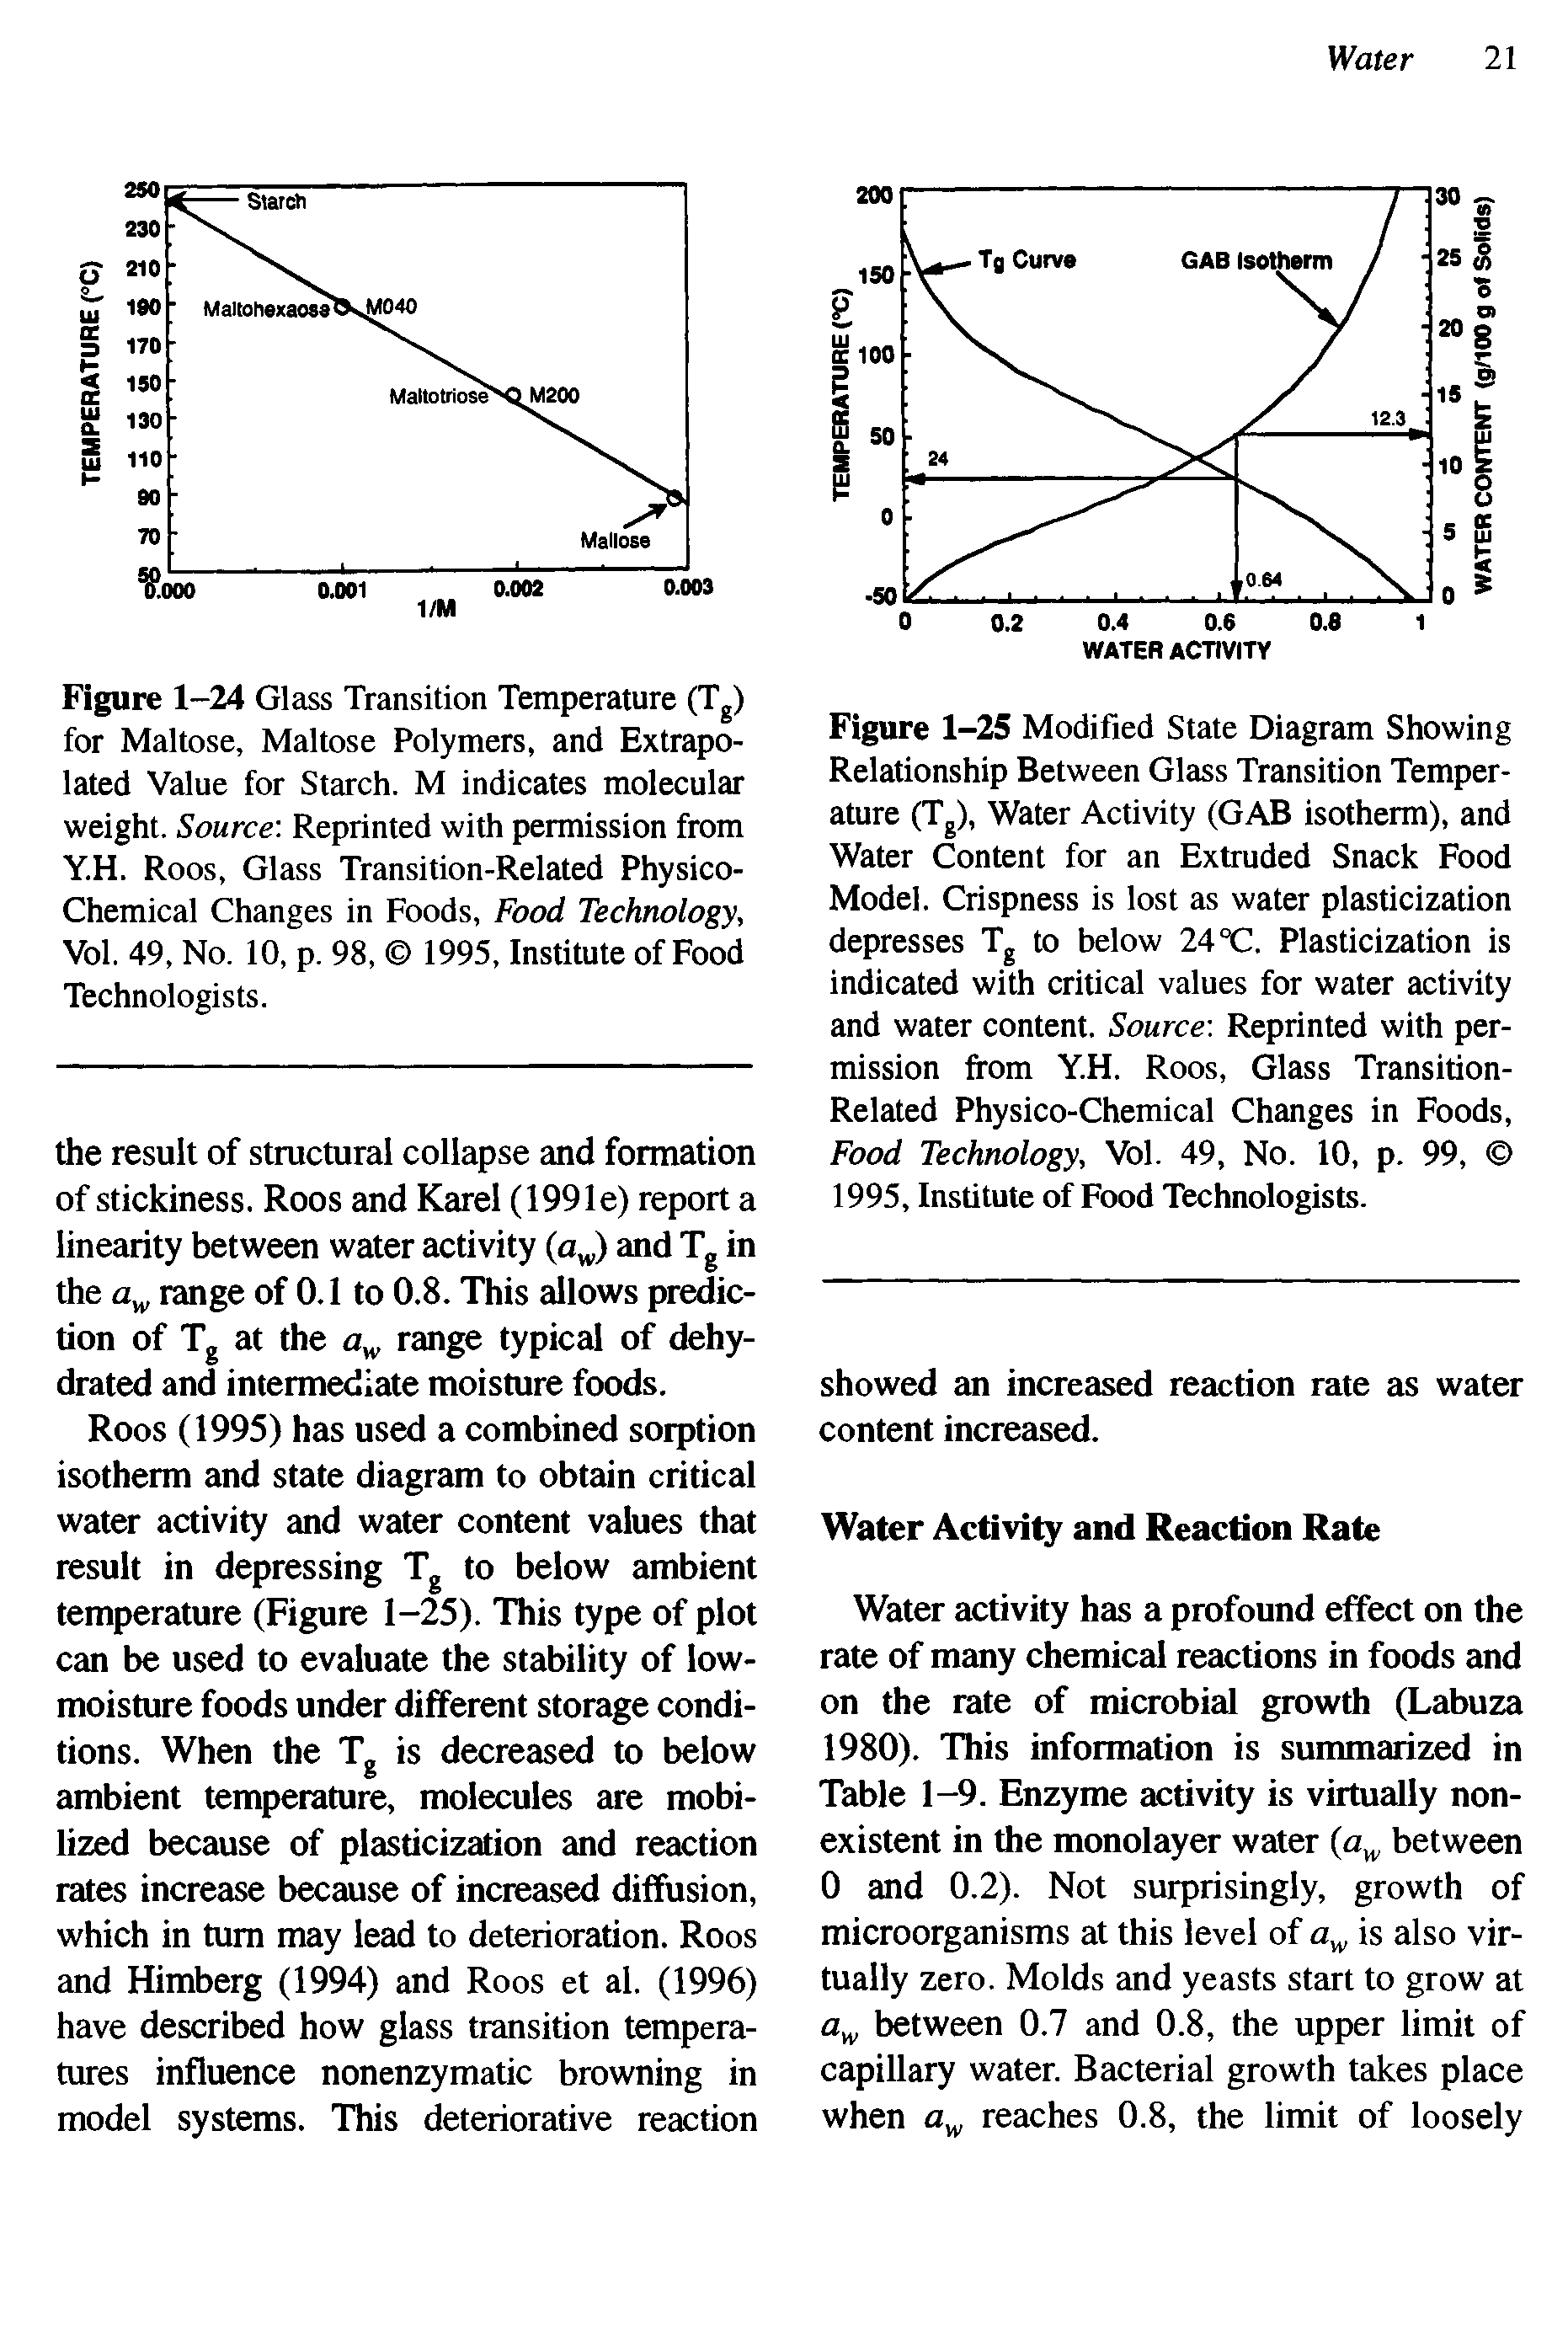 Figure 1-24 Glass Transition Temperature (Tg) for Maltose, Maltose Polymers, and Extrapolated Value for Starch. M indicates molecular weight. Source Reprinted with permission from Y.H. Roos, Glass Transition-Related Physico-Chemical Changes in Foods, Food Technology, Vol. 49, No. 10, p. 98, 1995, Institute of Food Technologists.